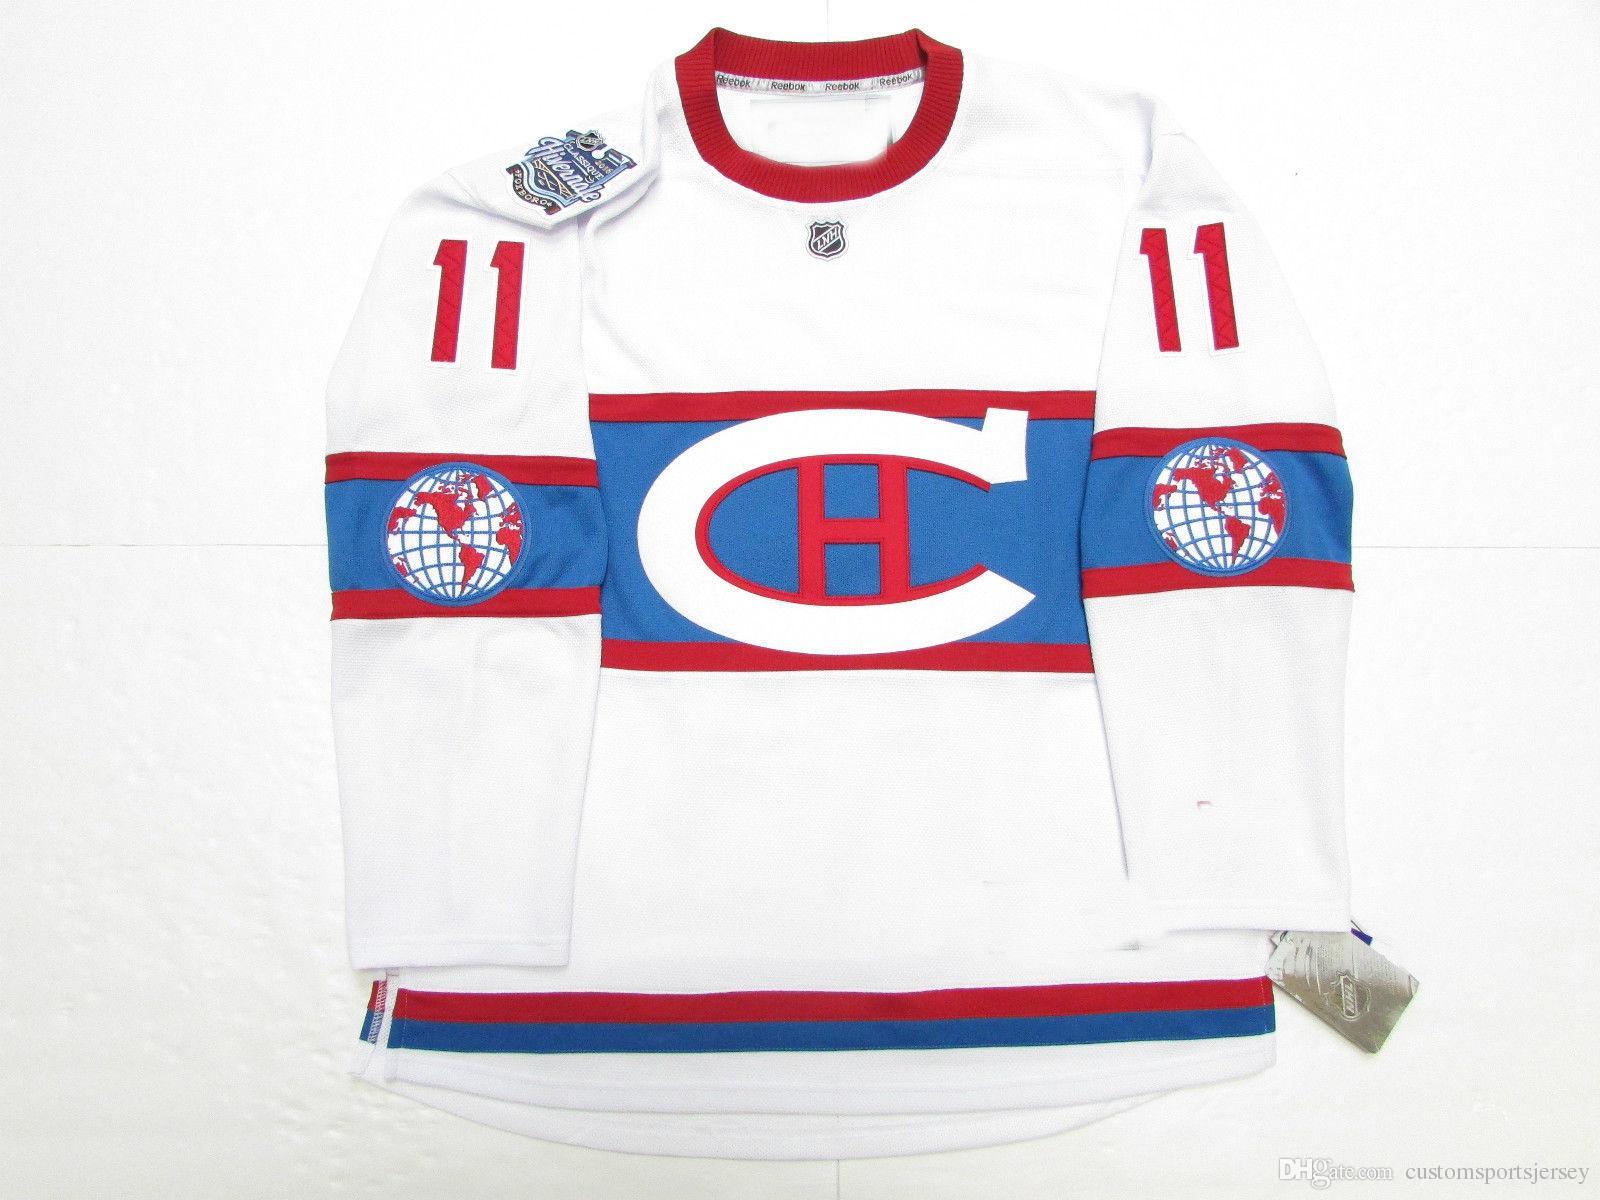 gallagher winter classic jersey